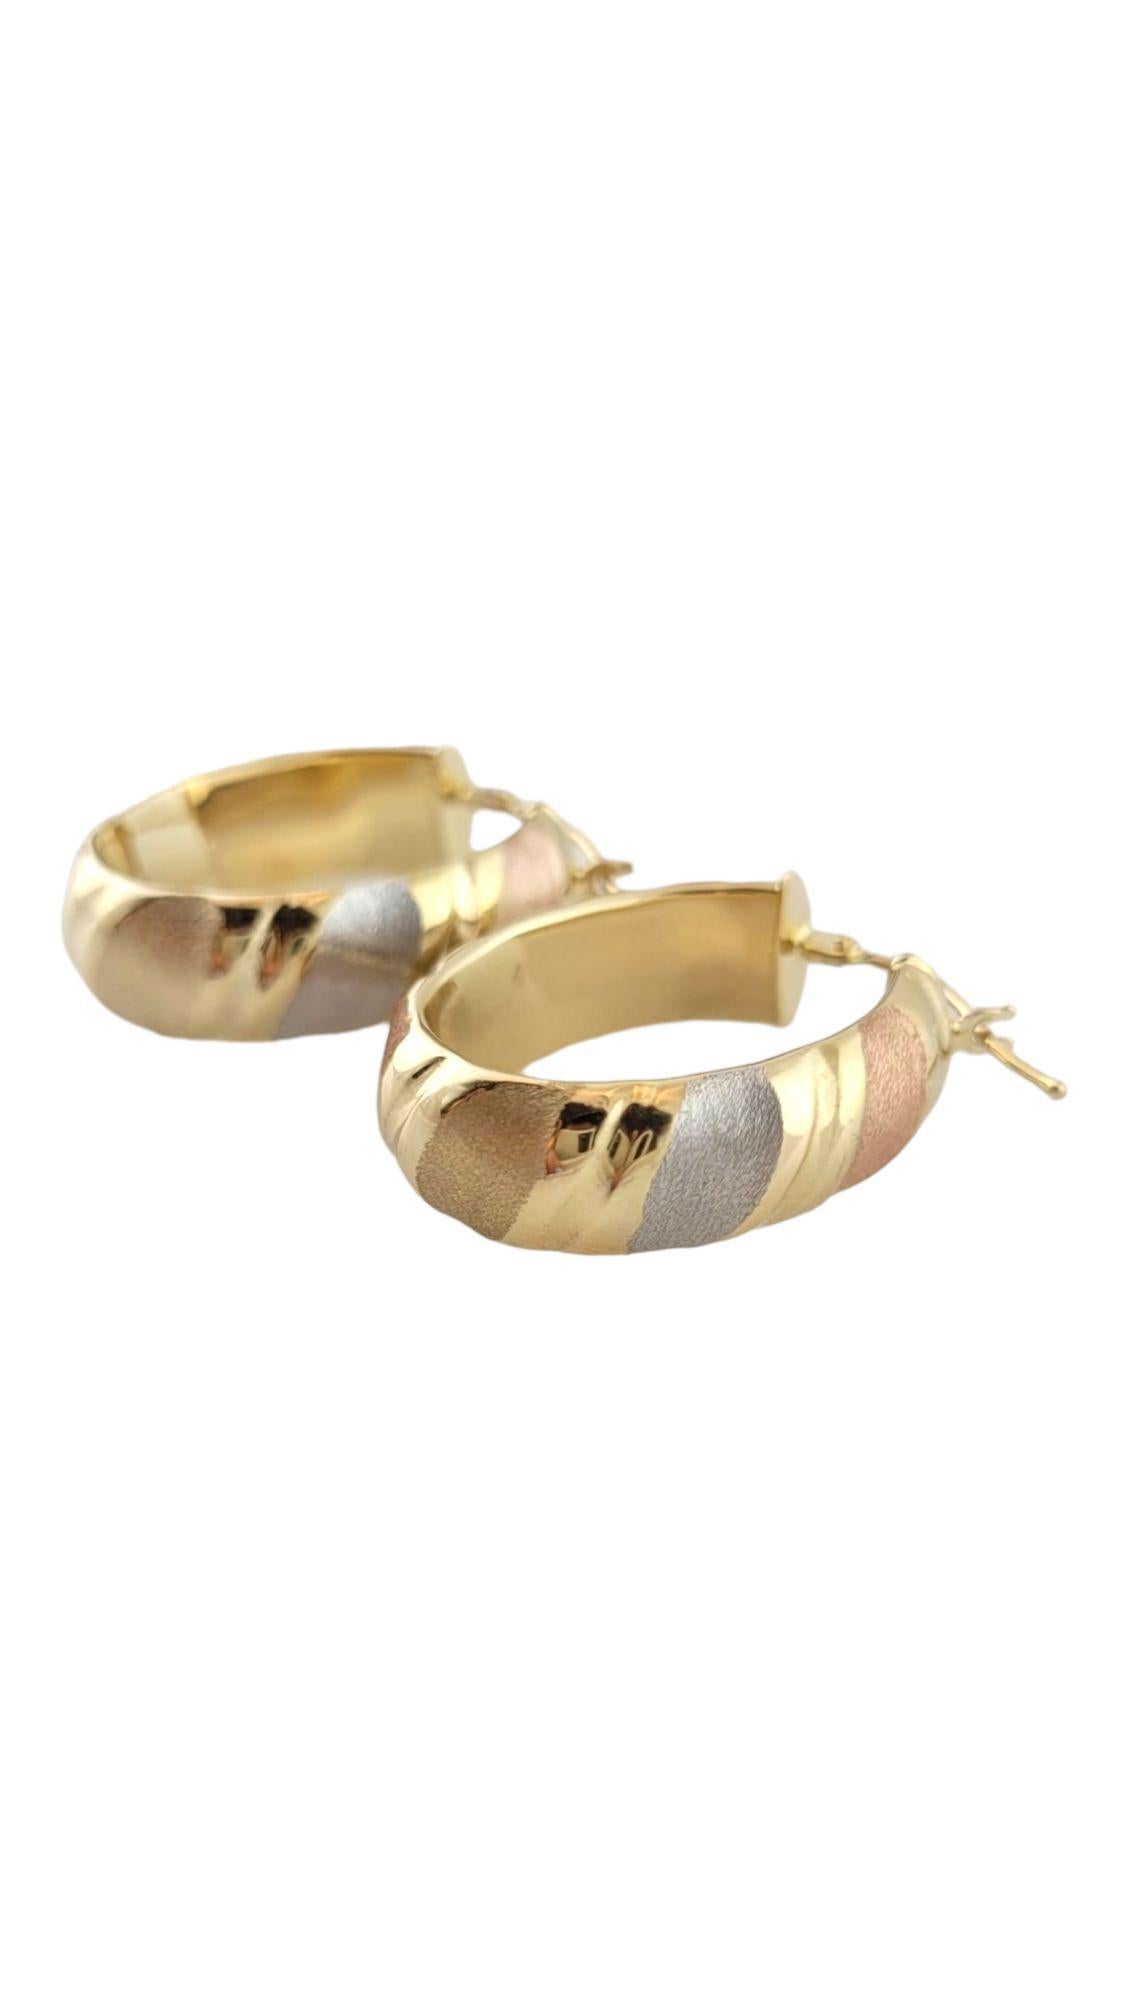 Vintage 14K Yellow, White and Rose Gold Hoop Earrings

Gorgeous set of hoop earrings crafted from 14K yellow, white, and rose gold in a beautiful, twisted stripe pattern!

Size: 26.7mm X 20.4mm X 7.4mm

Weight: 3.38 g/ 2.2 dwt

Hallmark: 14KT ITALY